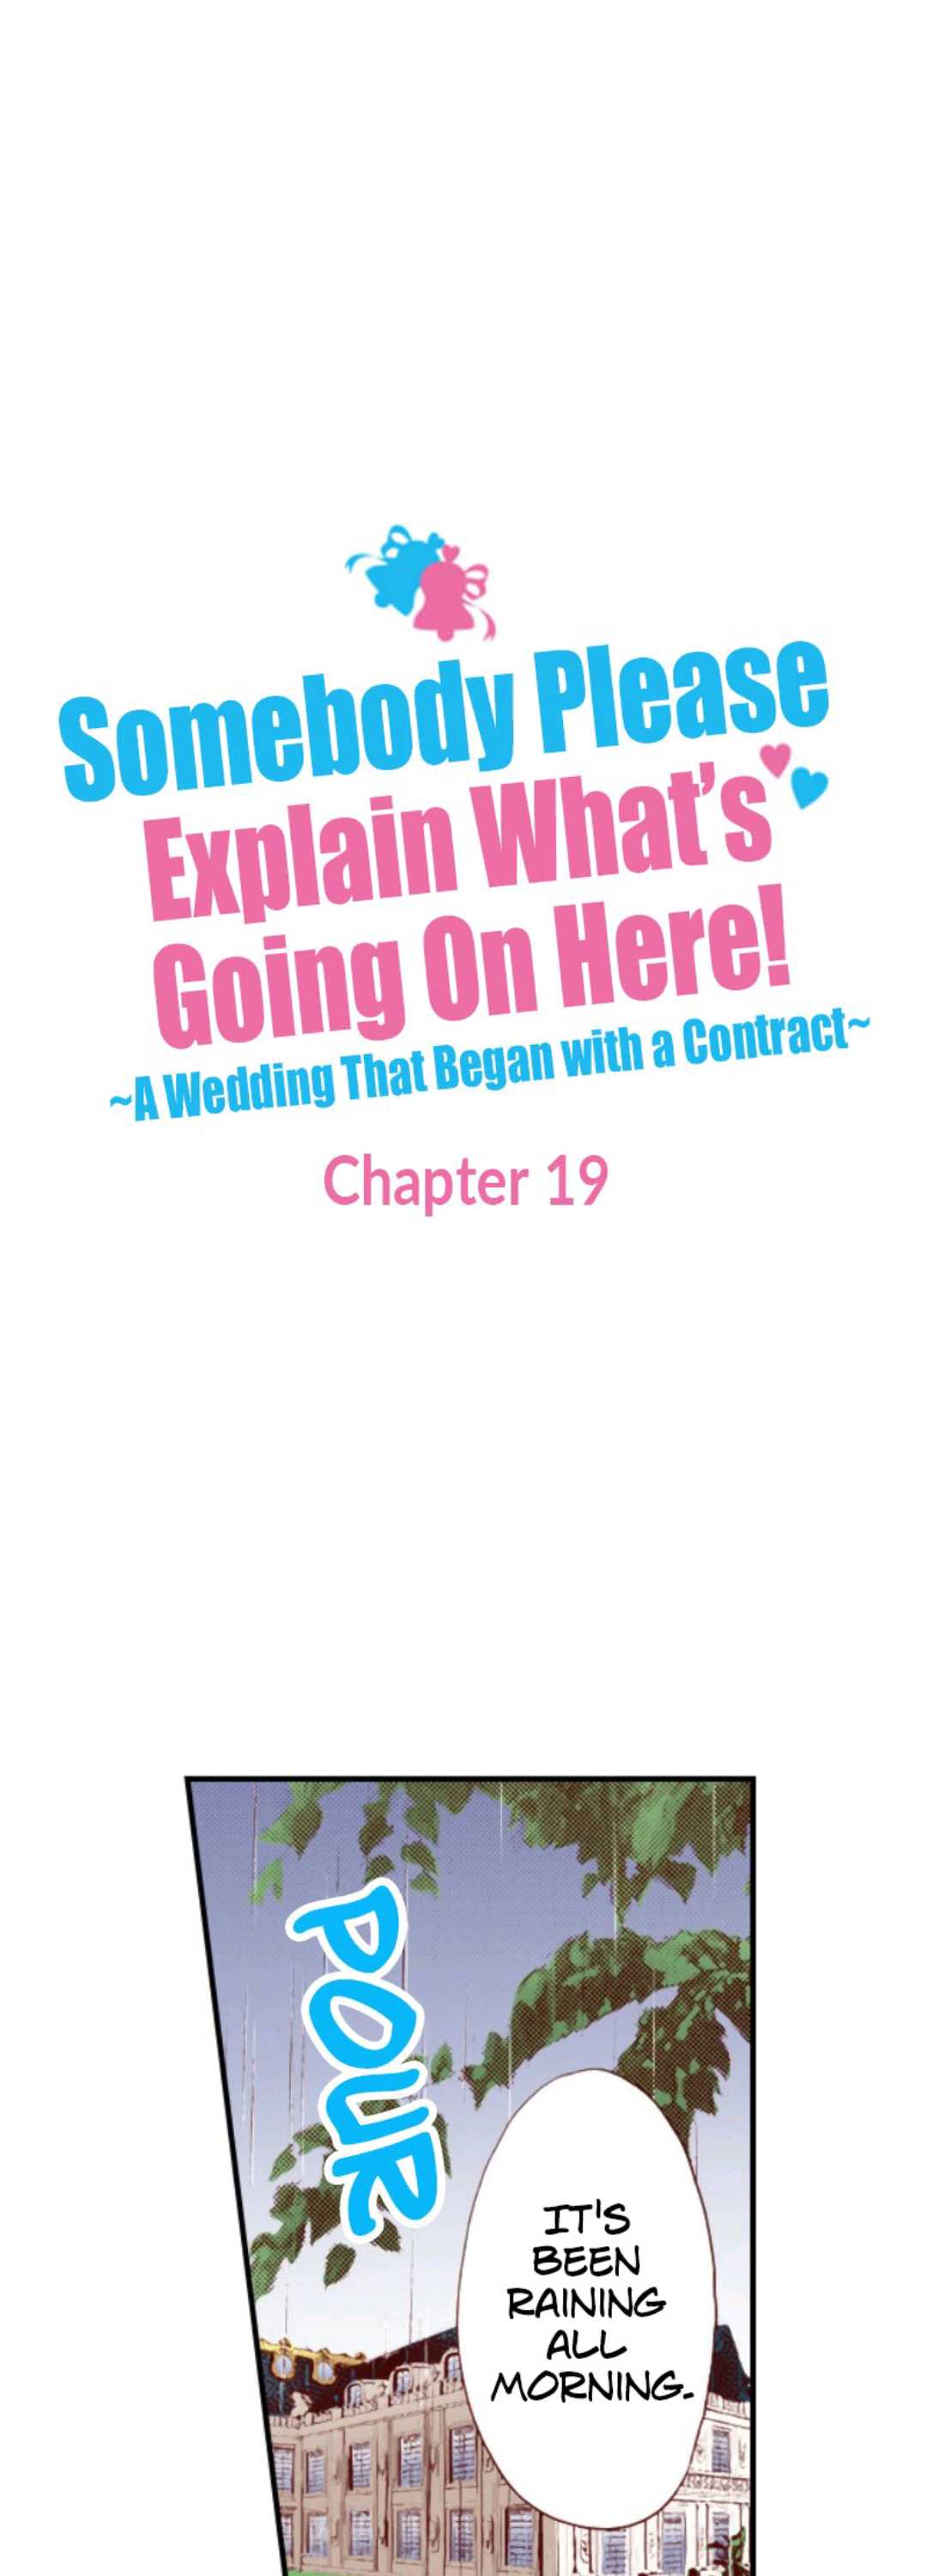 Somebody Please Explain What's Going On Here! ~A Wedding that Began With a Contract~ Chapter 19